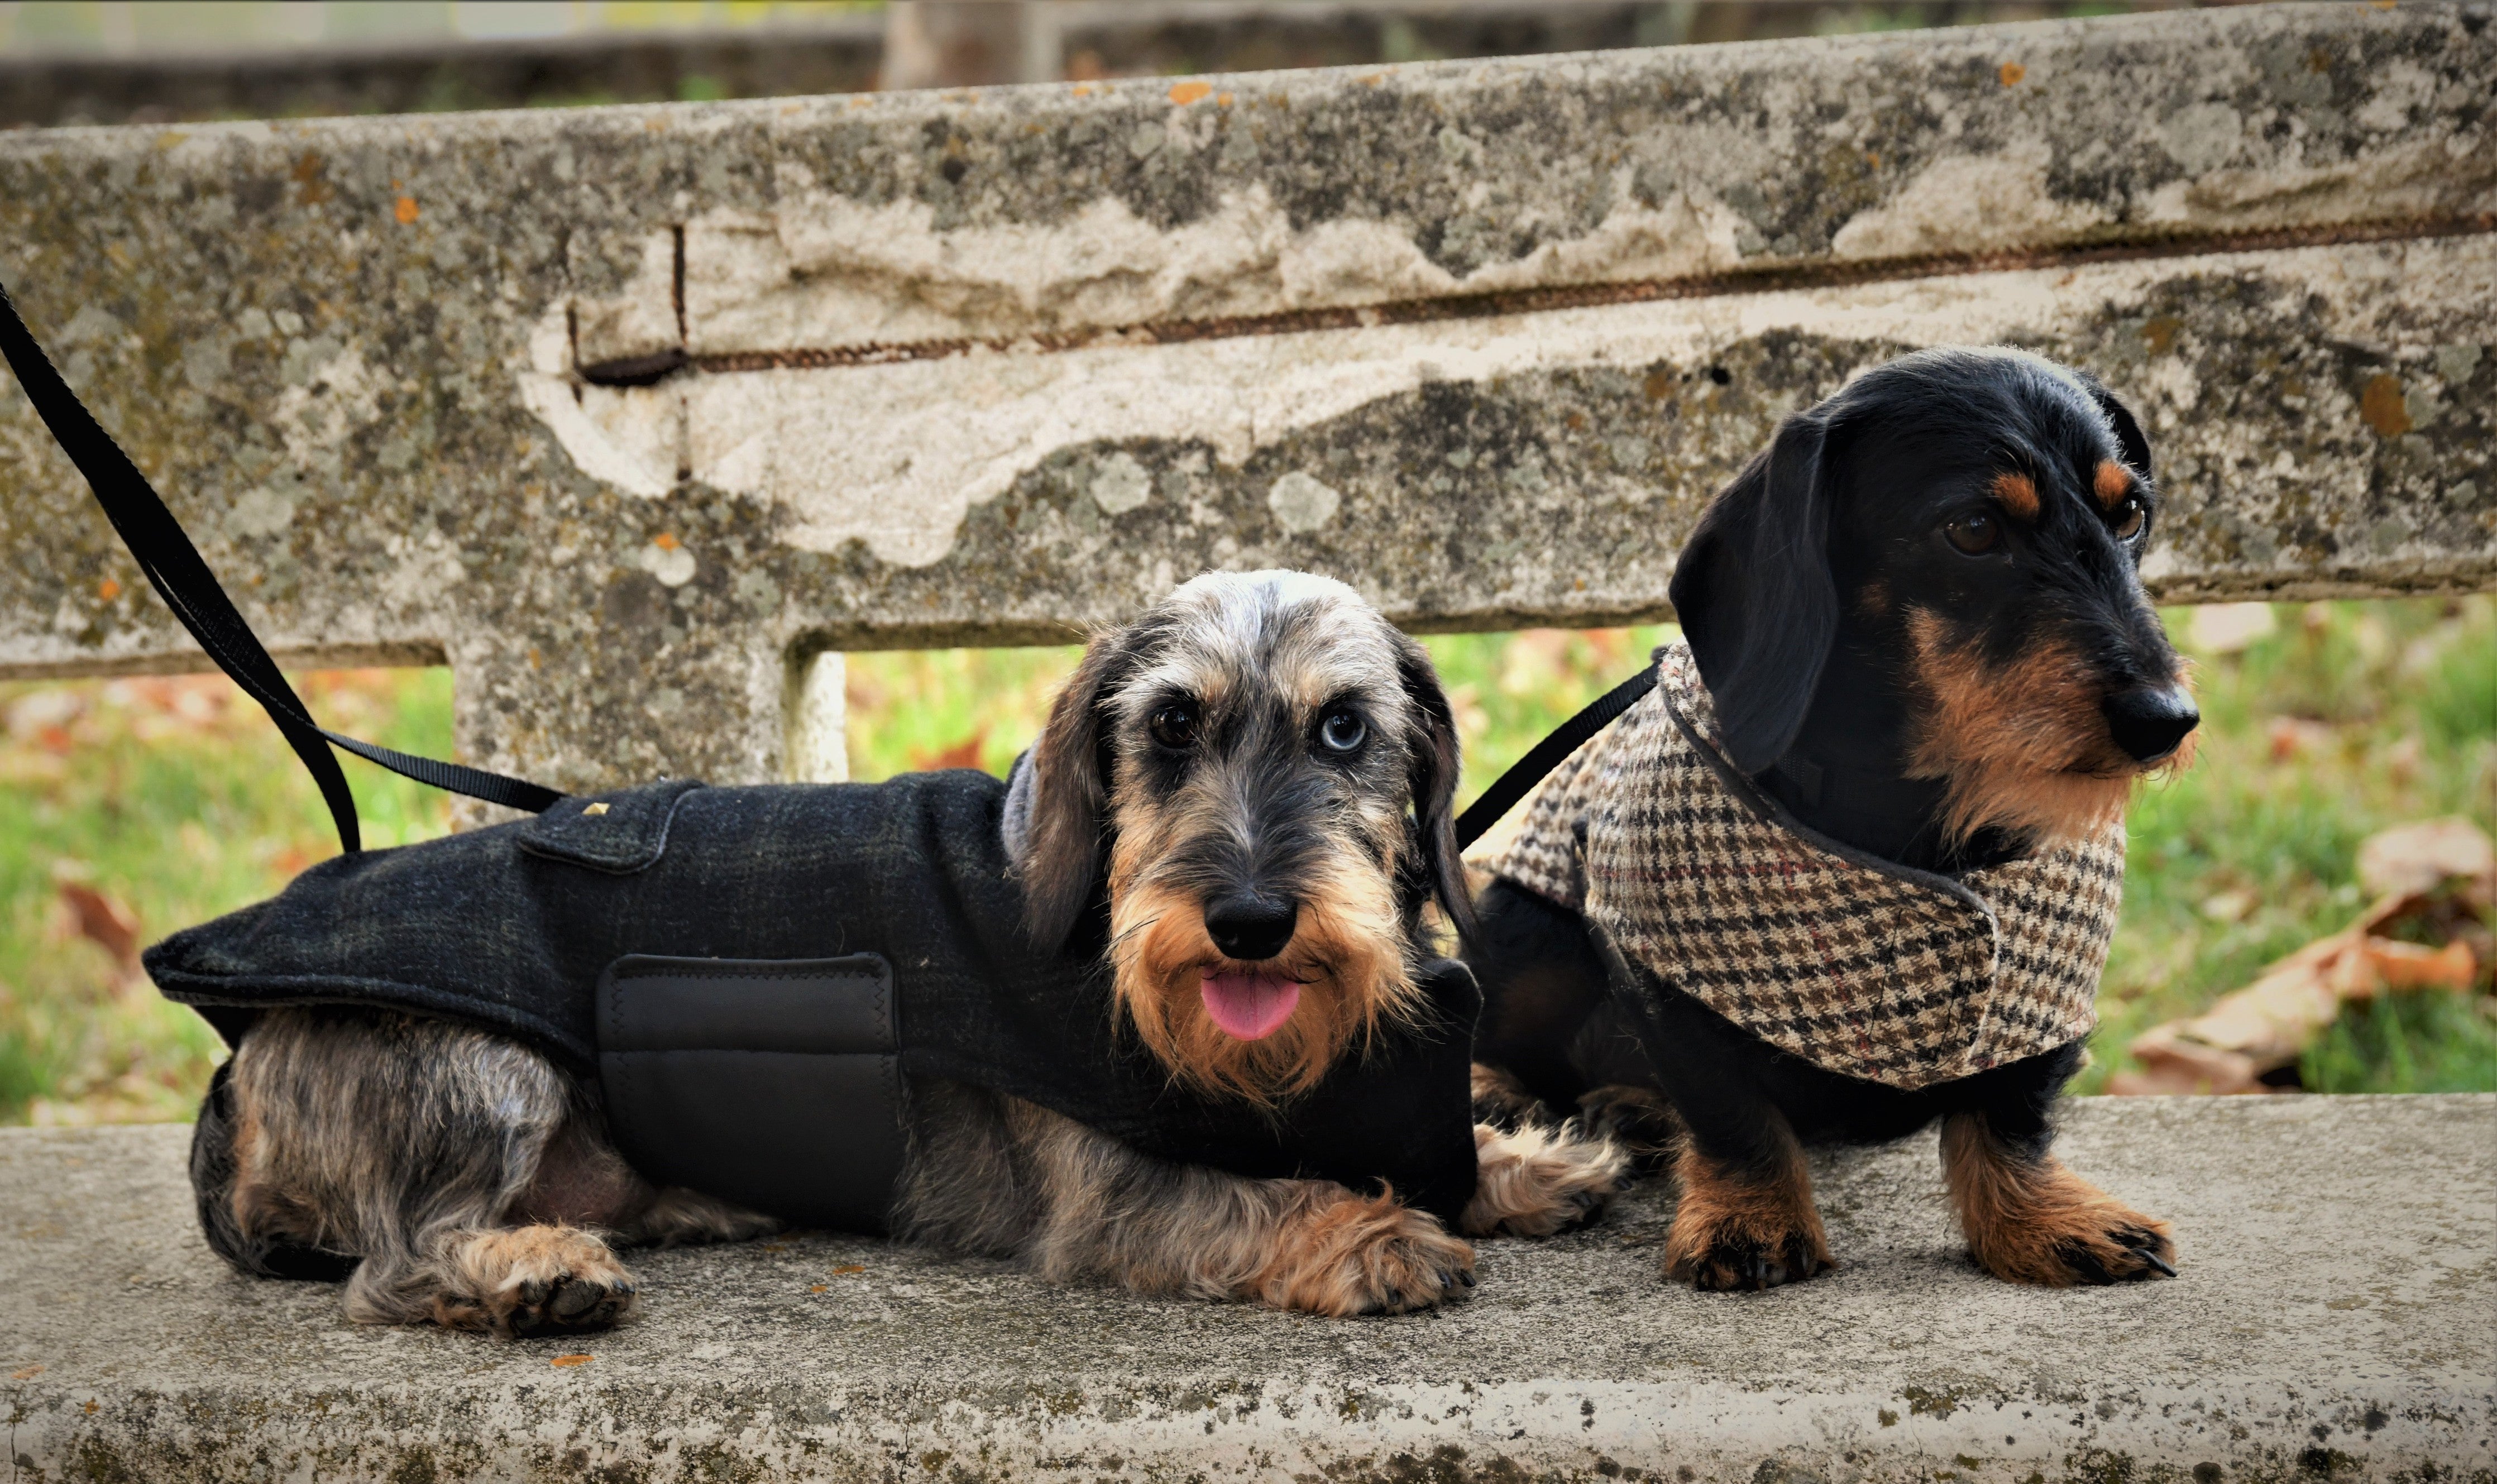 [tailoring] for dachshunds